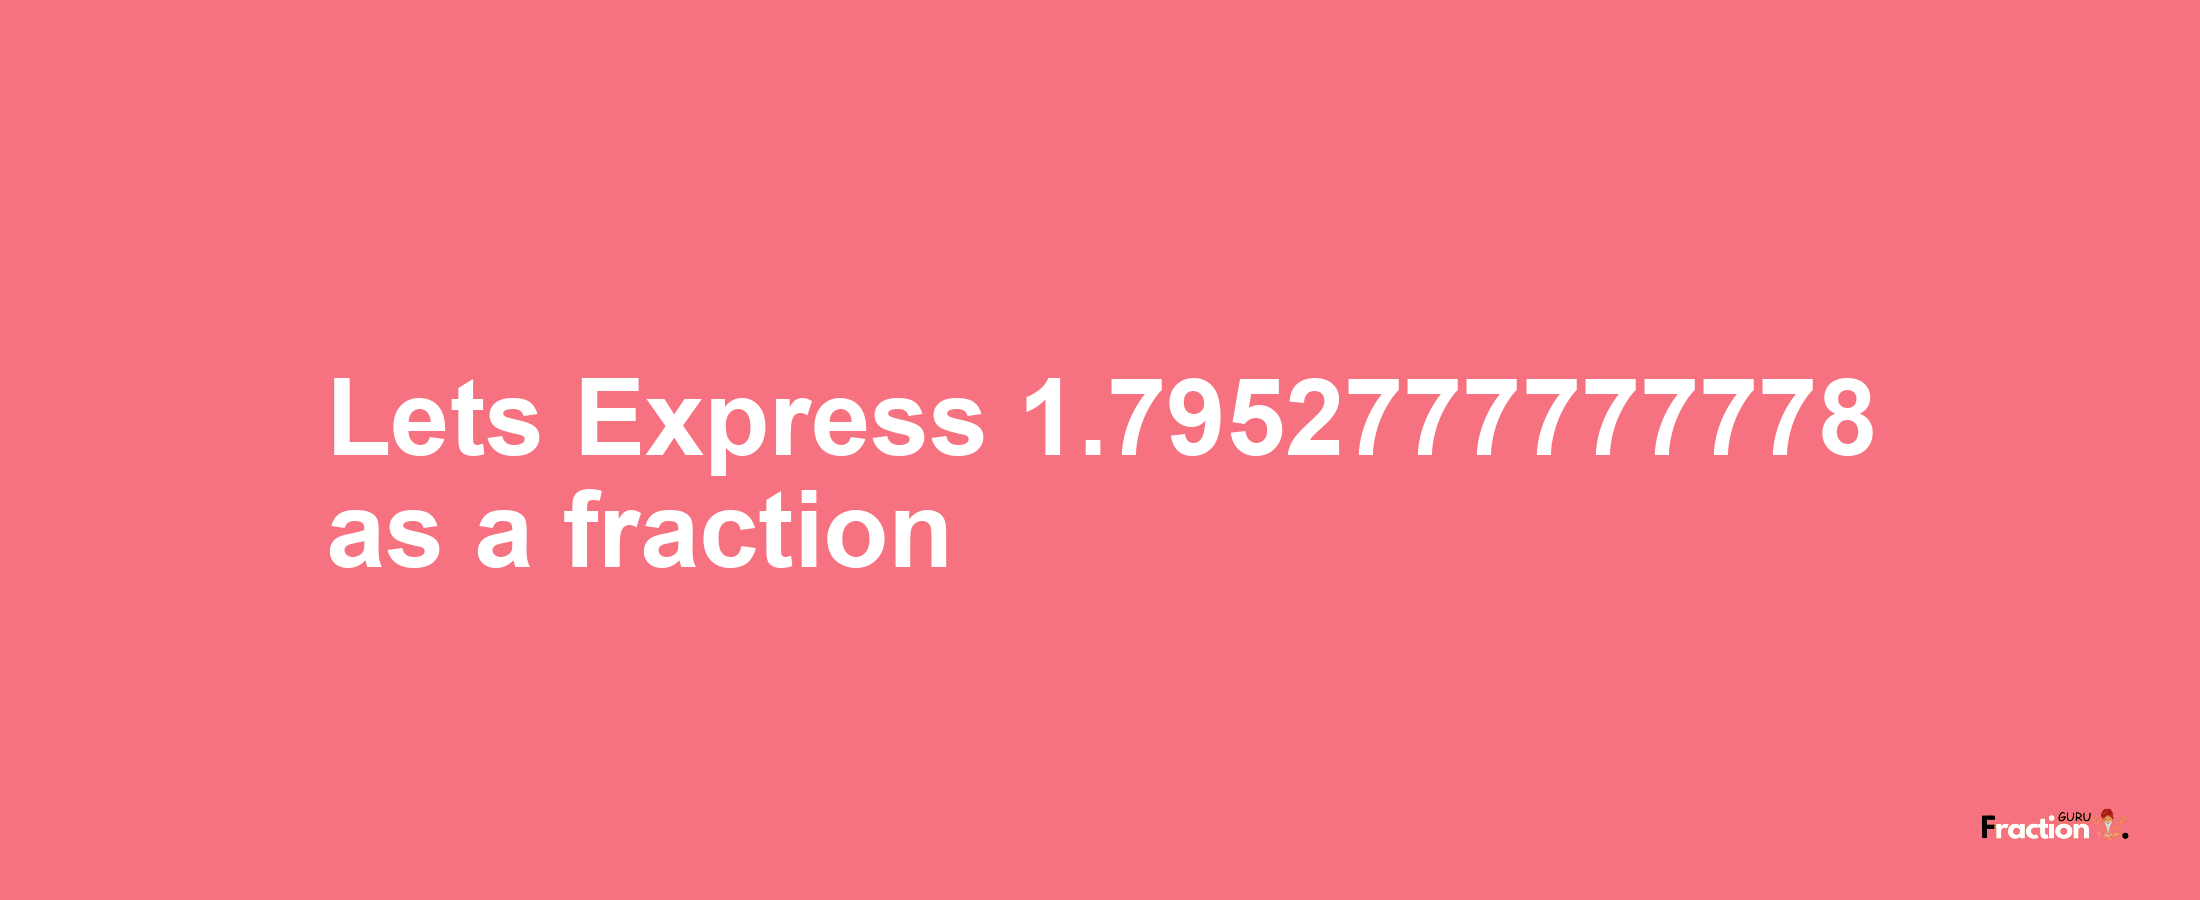 Lets Express 1.7952777777778 as afraction